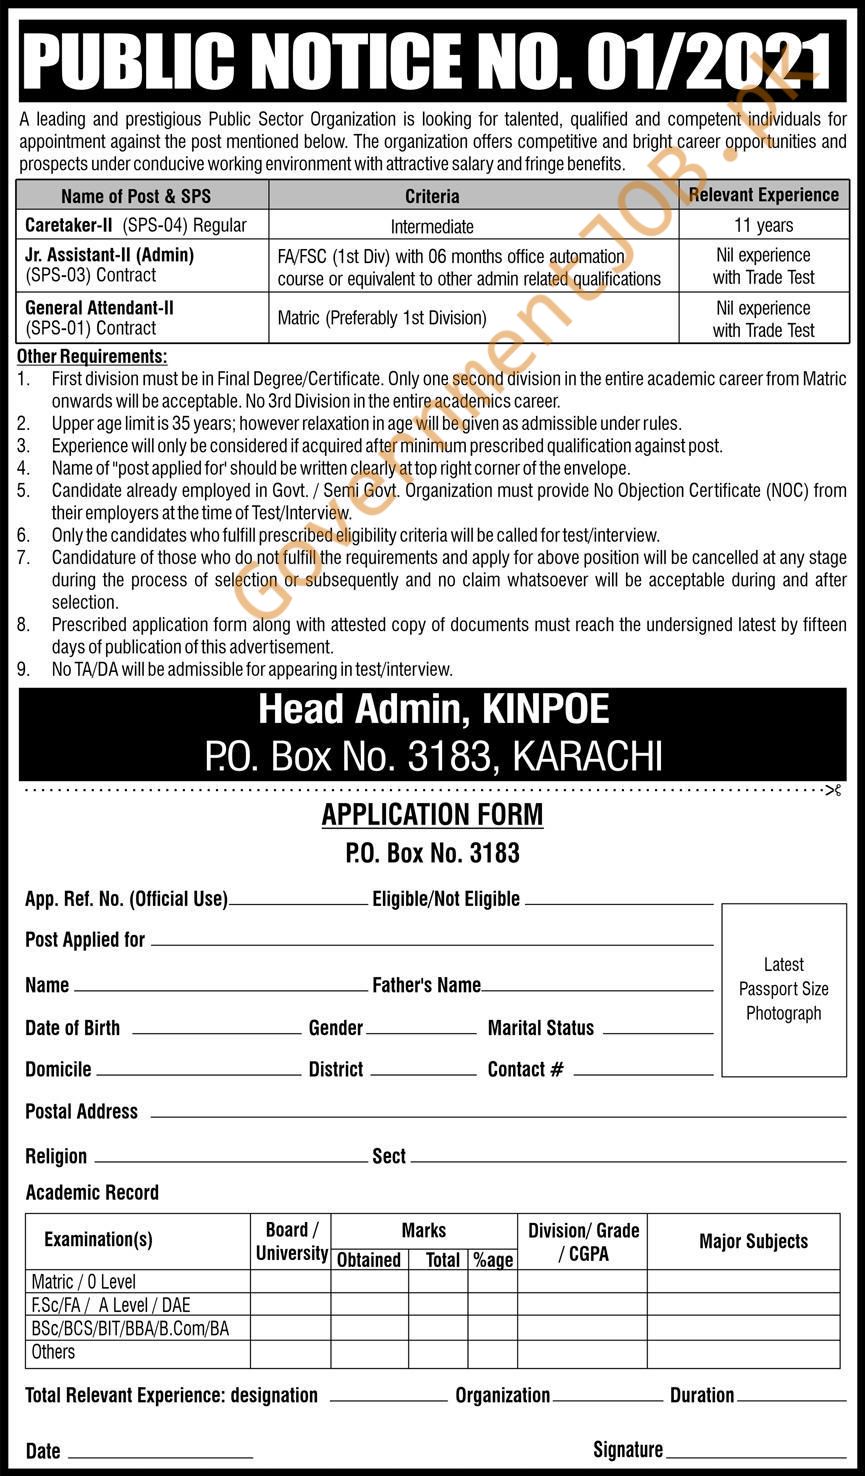 PAEC May 2021 Jobs - Pakistan Atomic Energy Commission May 2021 Jobs